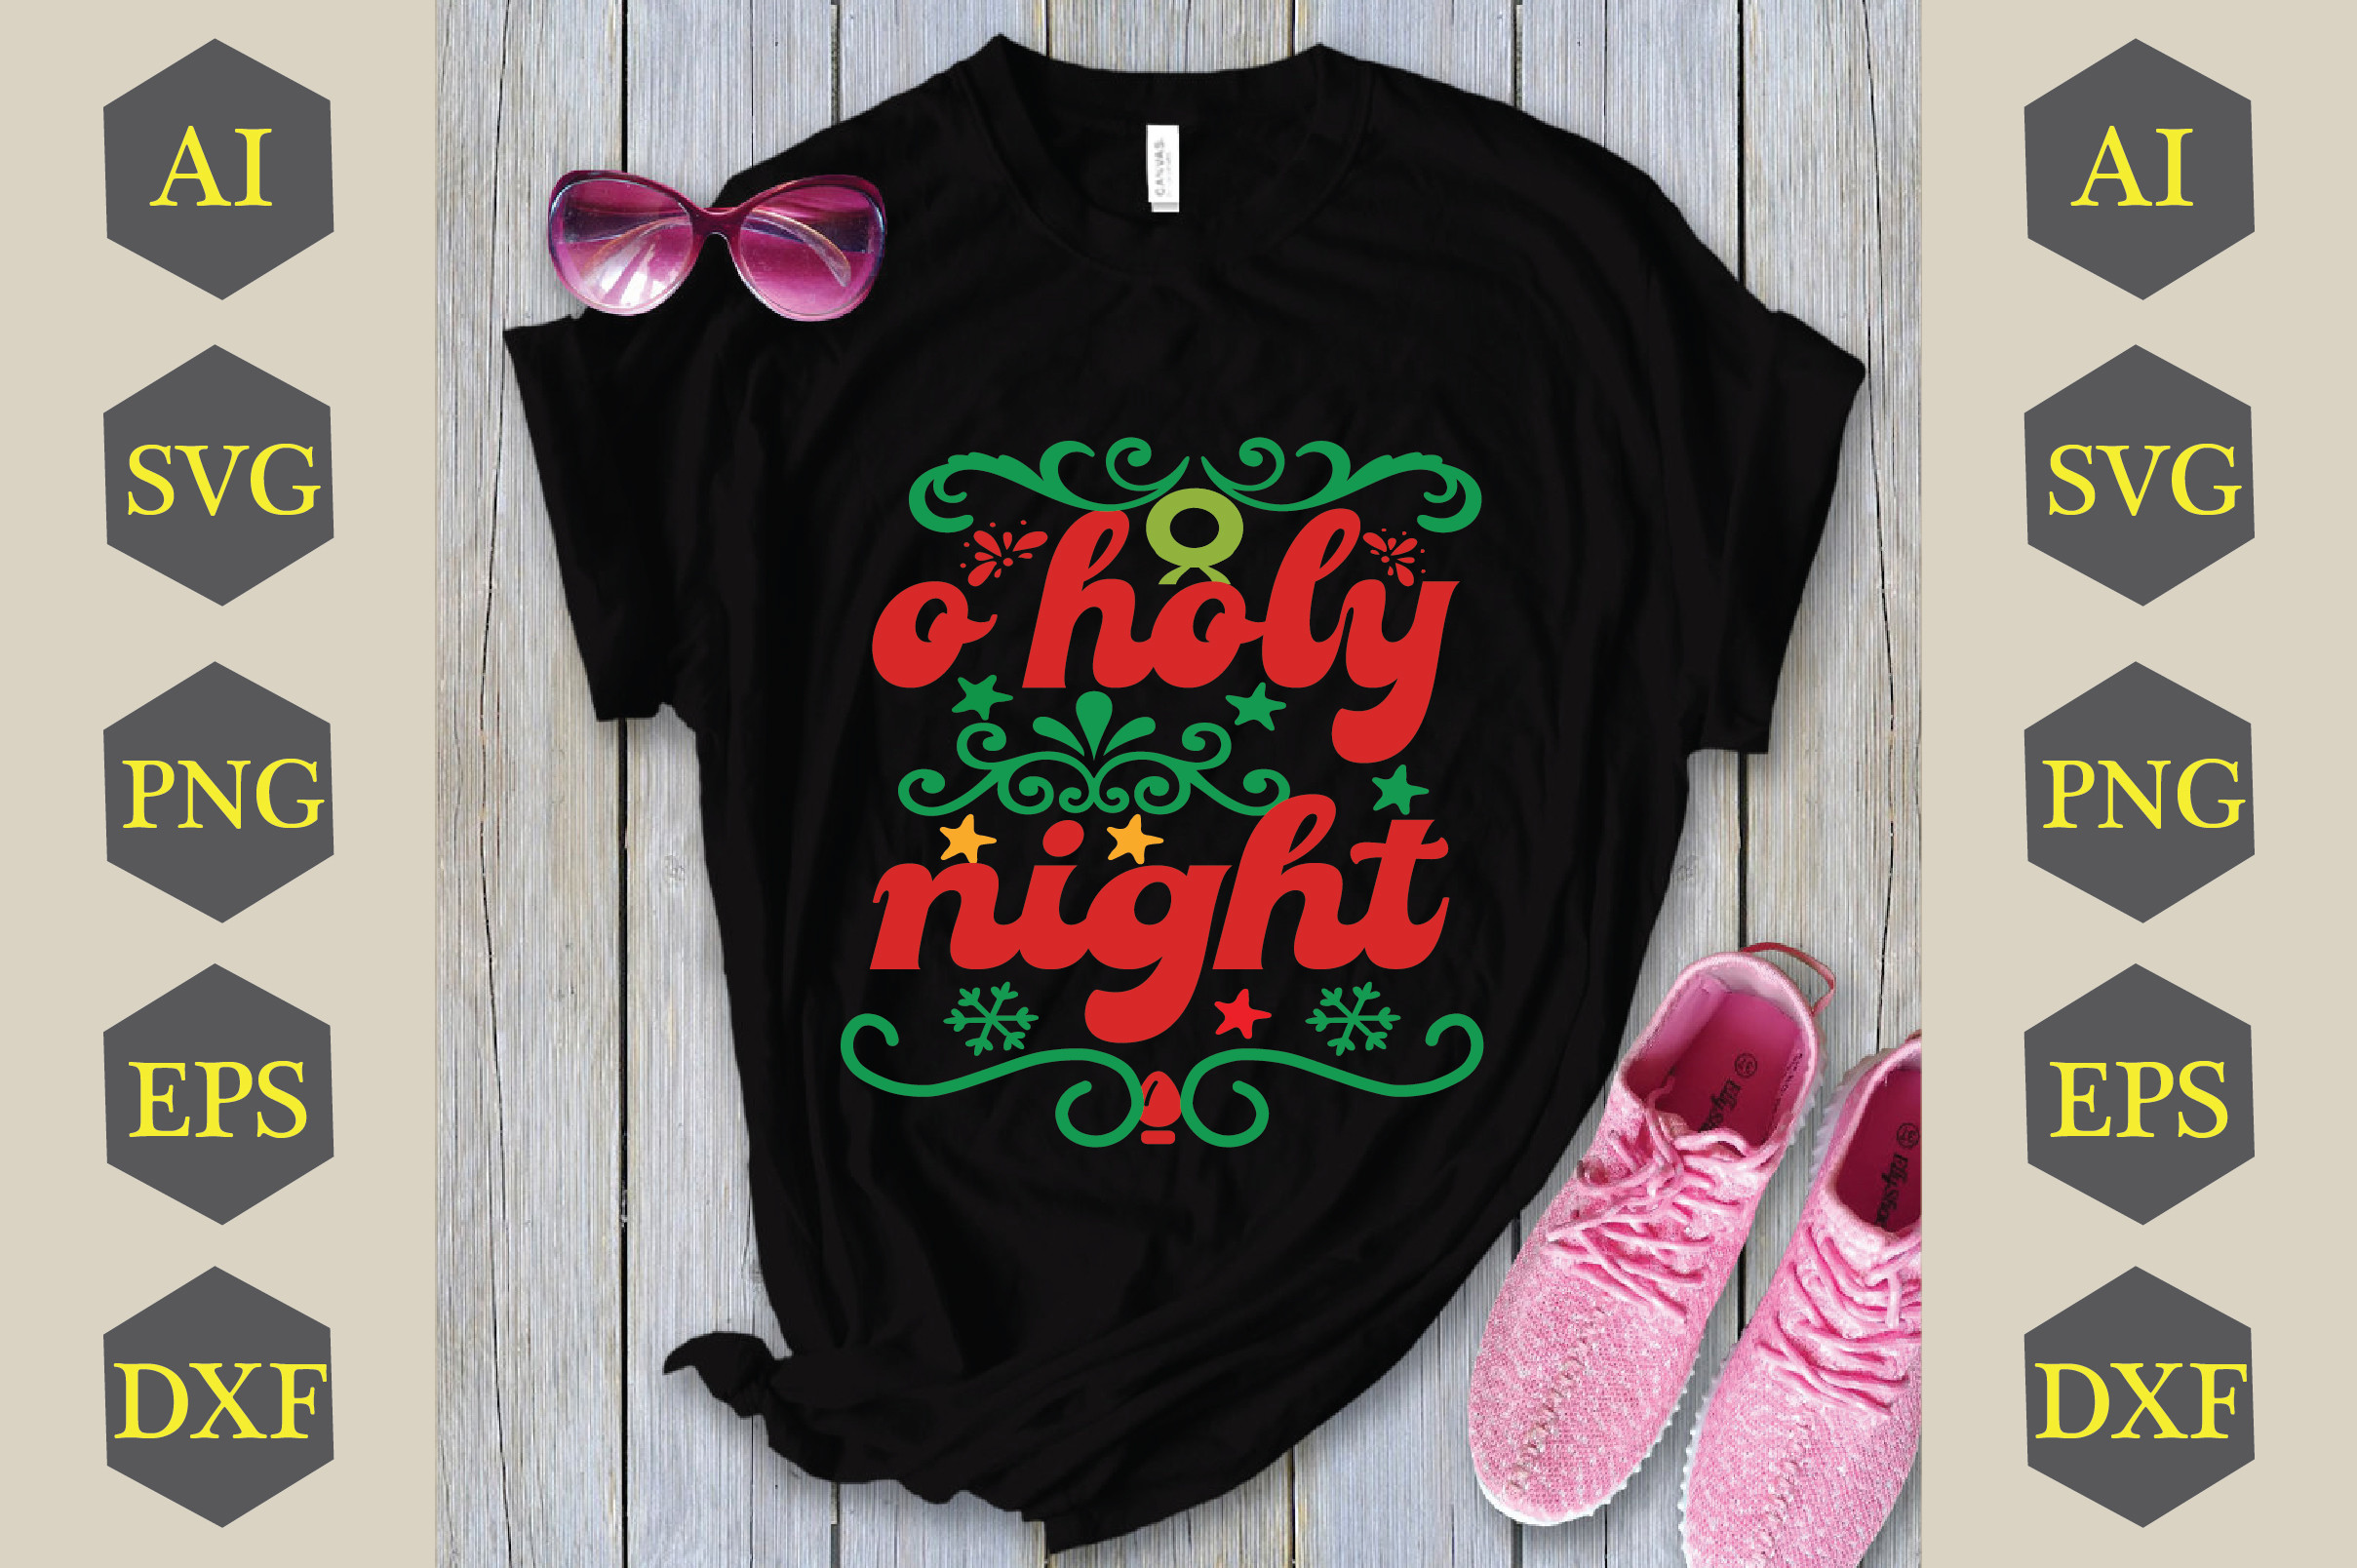 O Holy Night Graphic by Delitensra · Creative Fabrica